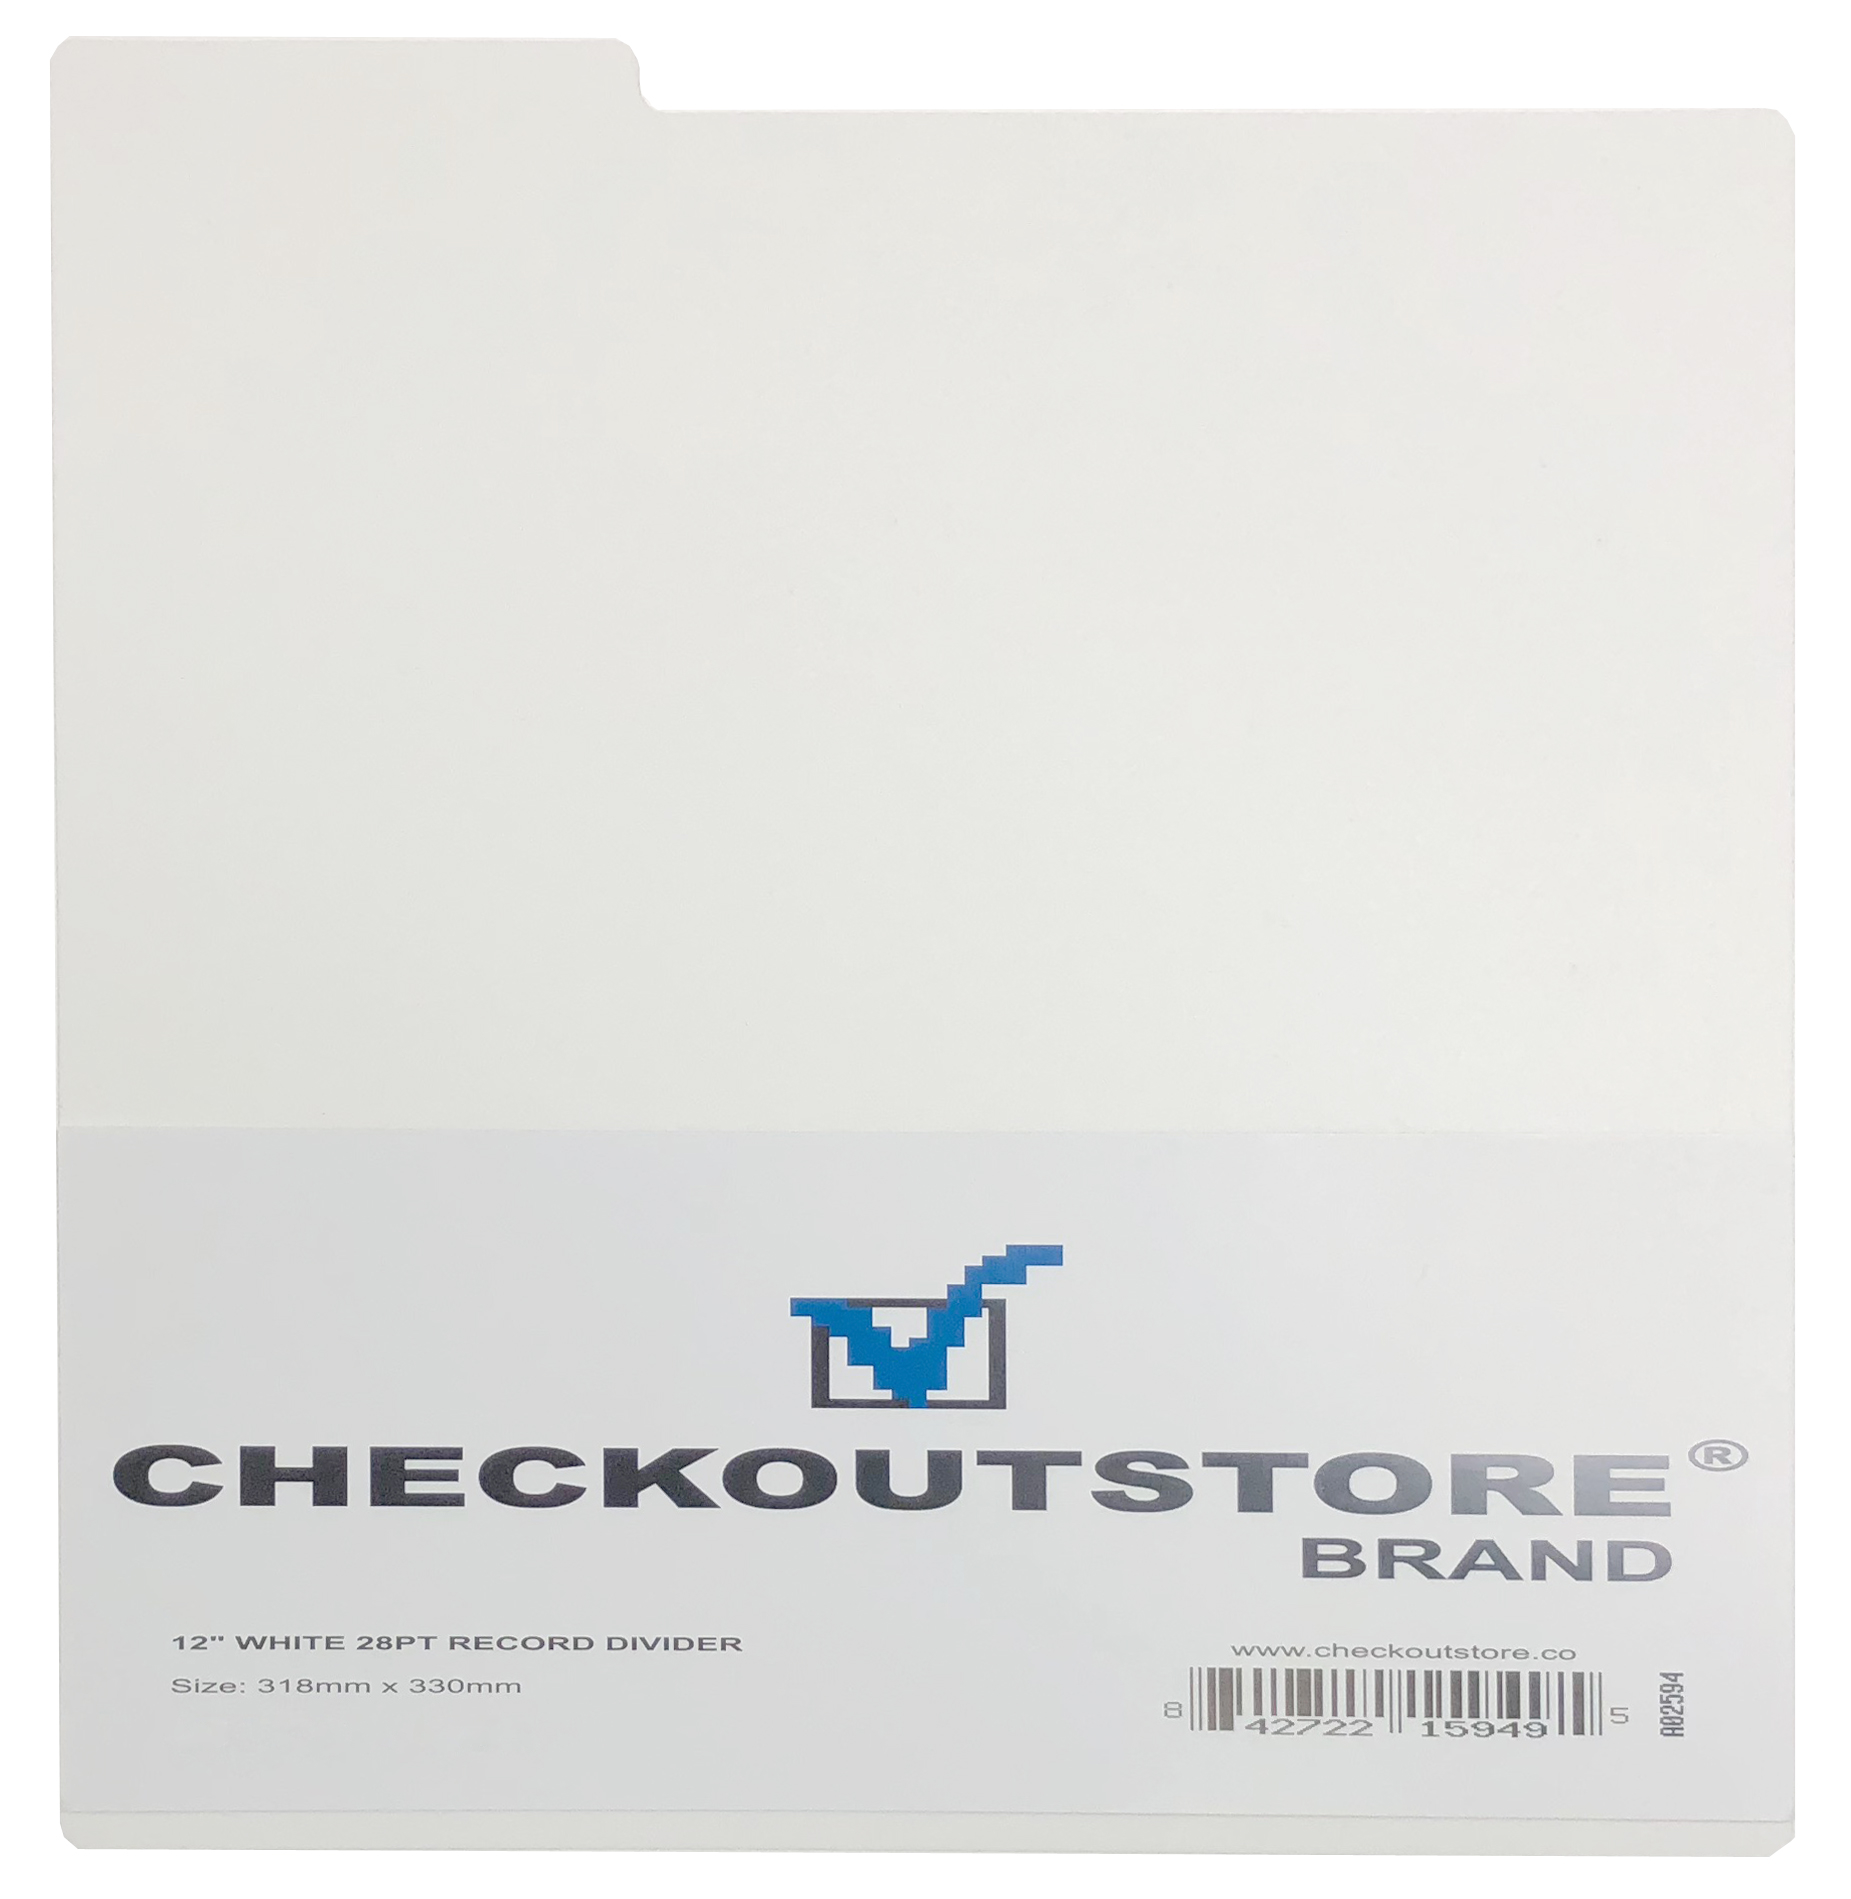 Image of ID 1214260851 200 CheckOutStore White Plastic Record Dividers for 12" LP Vinyl 33 RPM